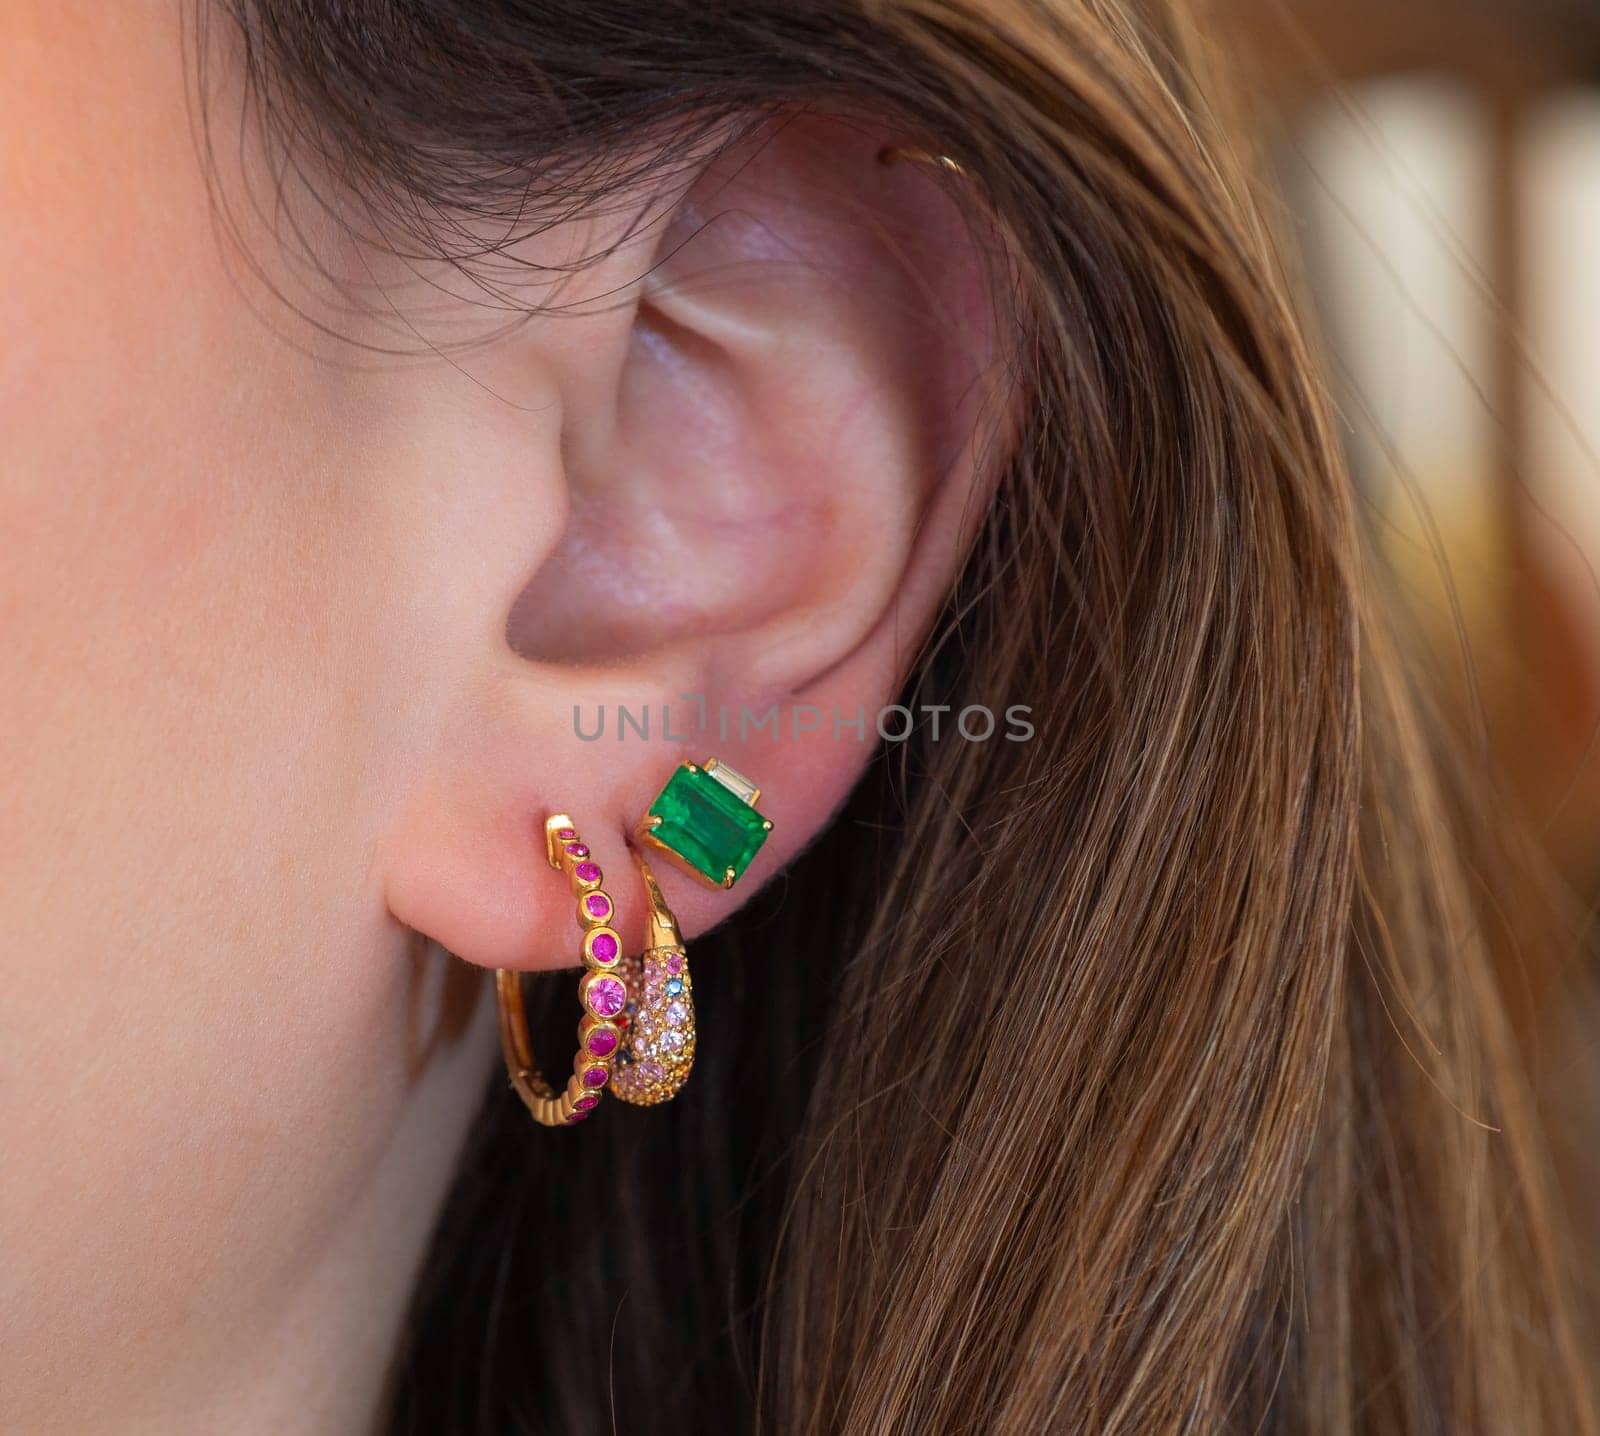 Closeup detail of ladies female ear with luxury expensive earrings and precious gemstones